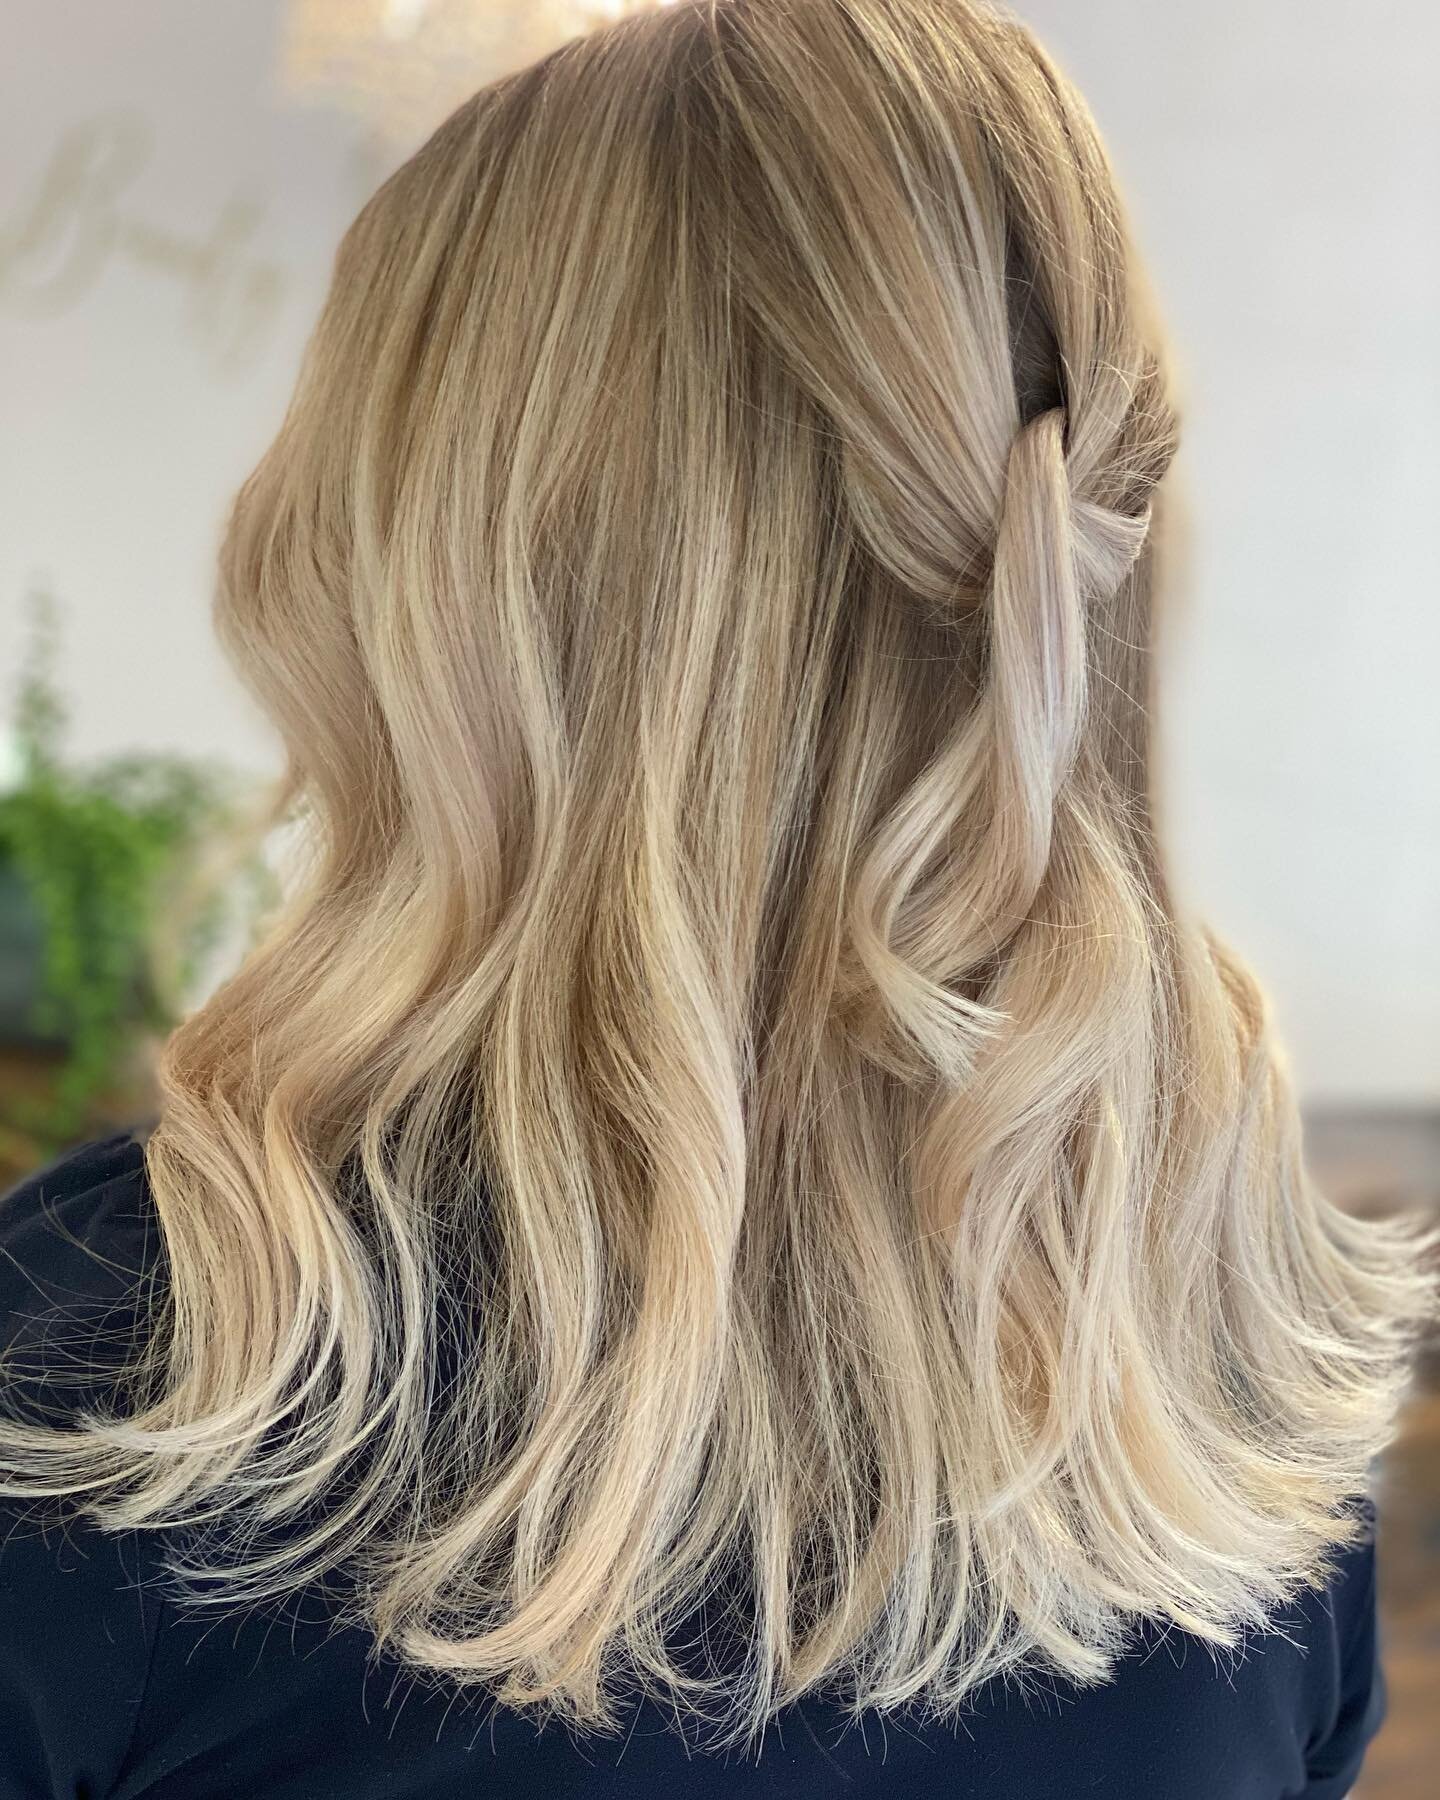 &bull;PAINTED&bull; Painted hair, or Balayage is the perfect way to add that brightness while still maintaining a low maintenance blonde. So, Yes! You can have a beautiful blonde with it still being low maintenance 🤩

Styling Products: Neuma Moistur